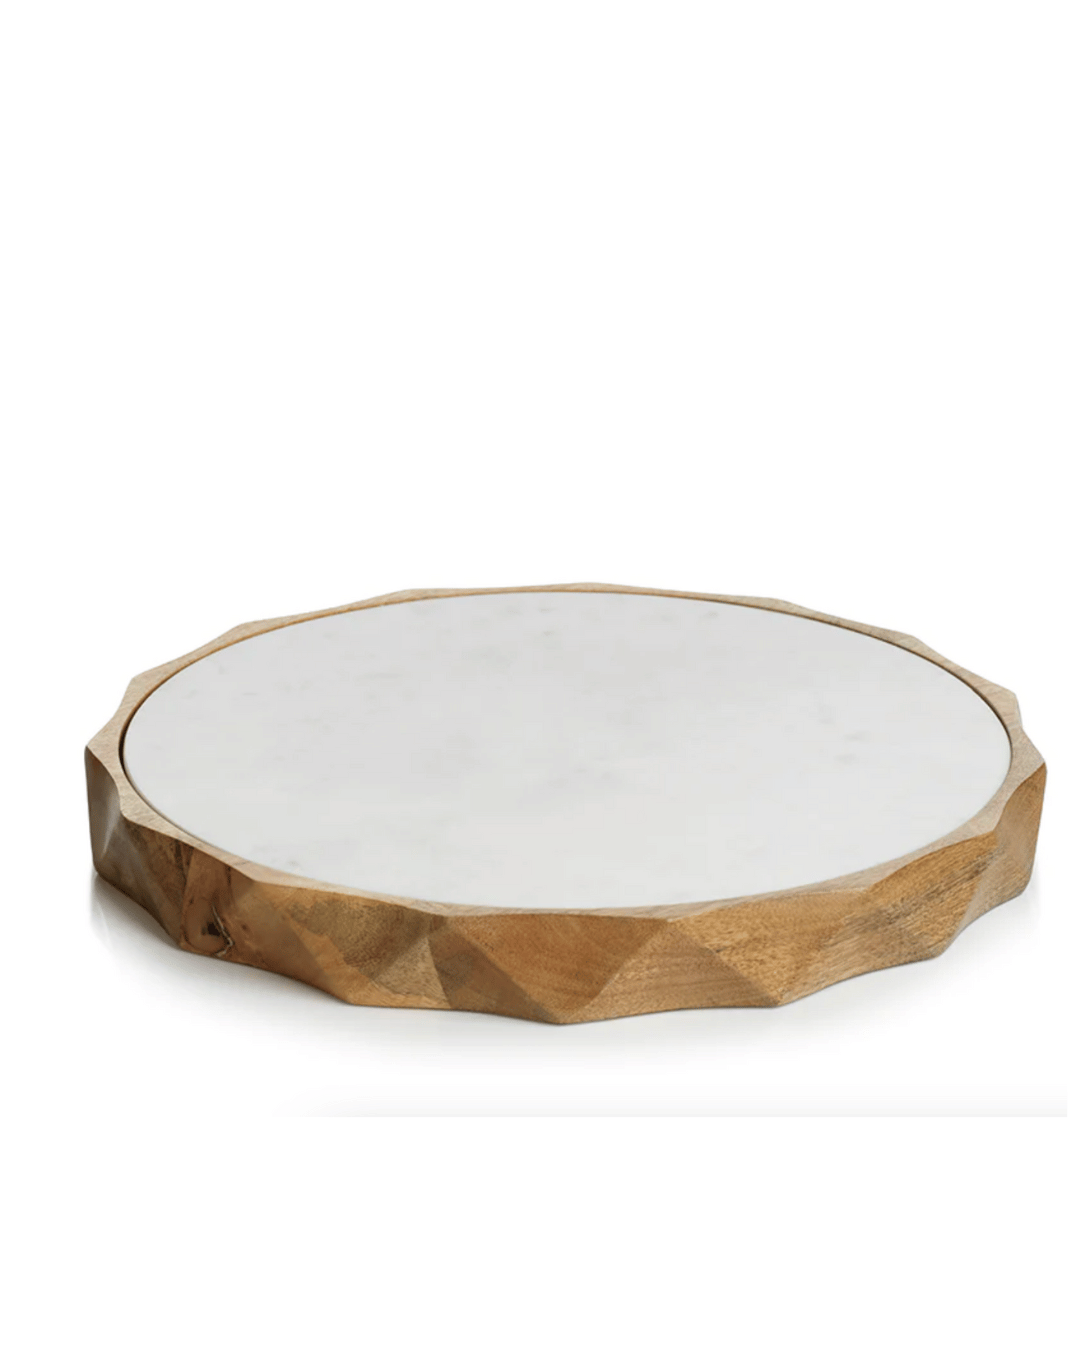 A Zodax marble board large made of wood with geometric patterns on the sides and a smooth white marble surface, perfect for a bungalow in Scottsdale, Arizona.